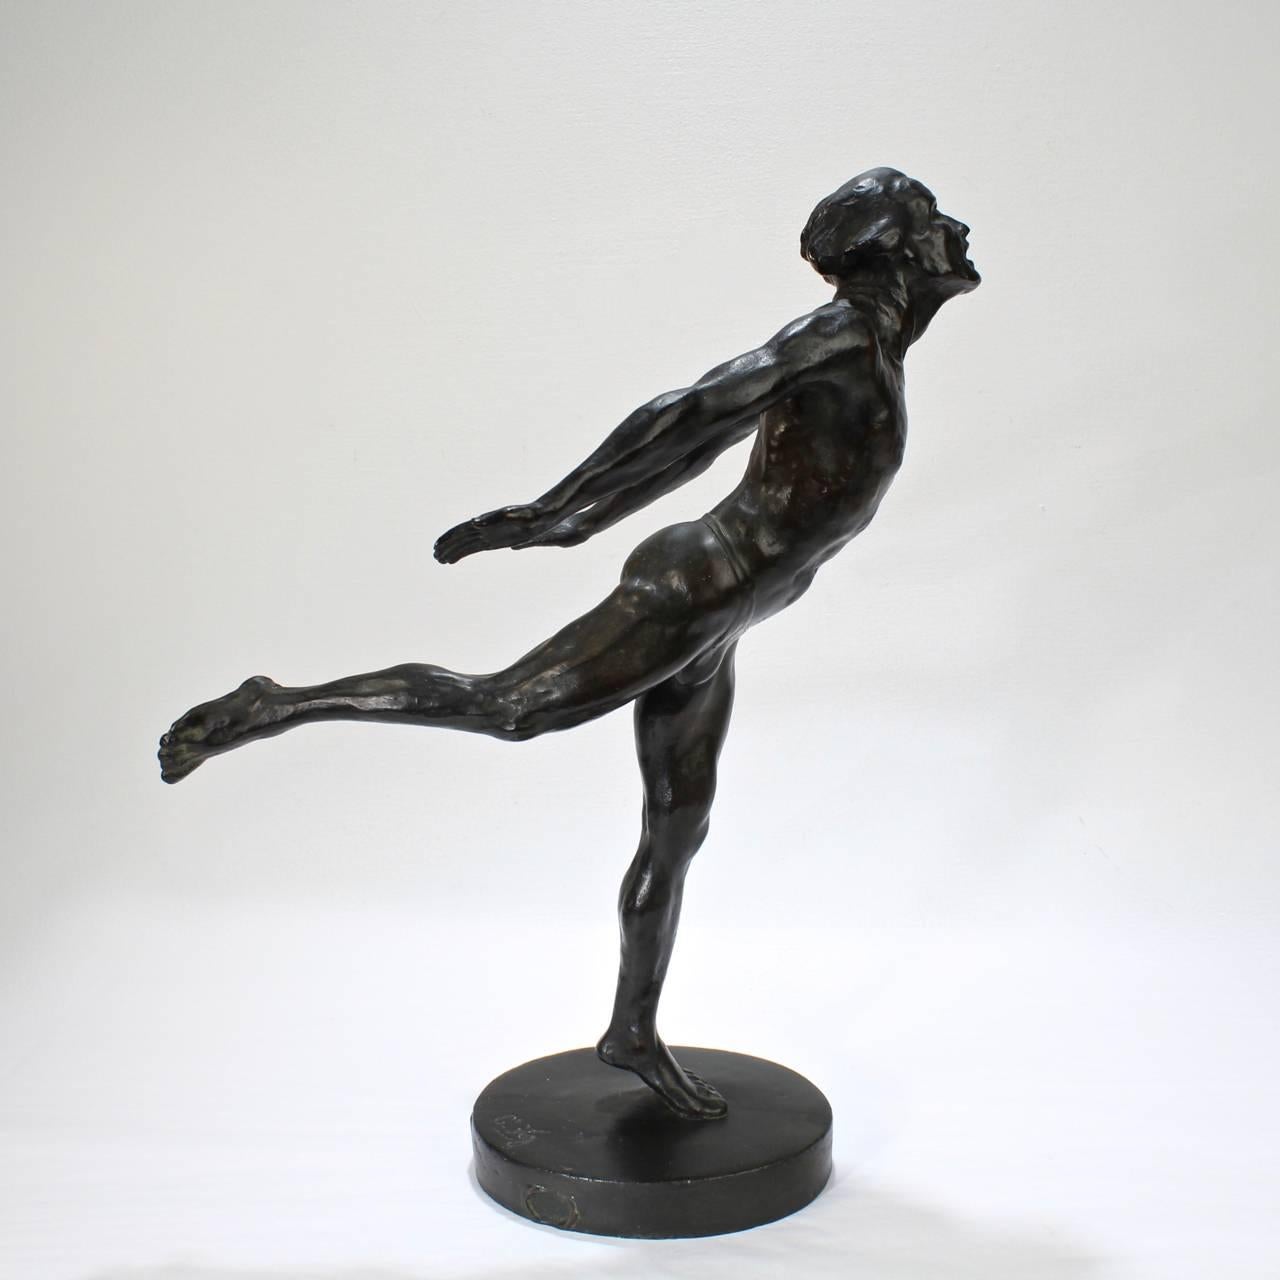 A rare and fine period French Art Deco bronze sculpture of a male dancer or ballerina (nude but for a dancer's belt). The dancer stands with outstretched arms and leg bearing a strained or yearning expression.

The bronze was cast by Arthur